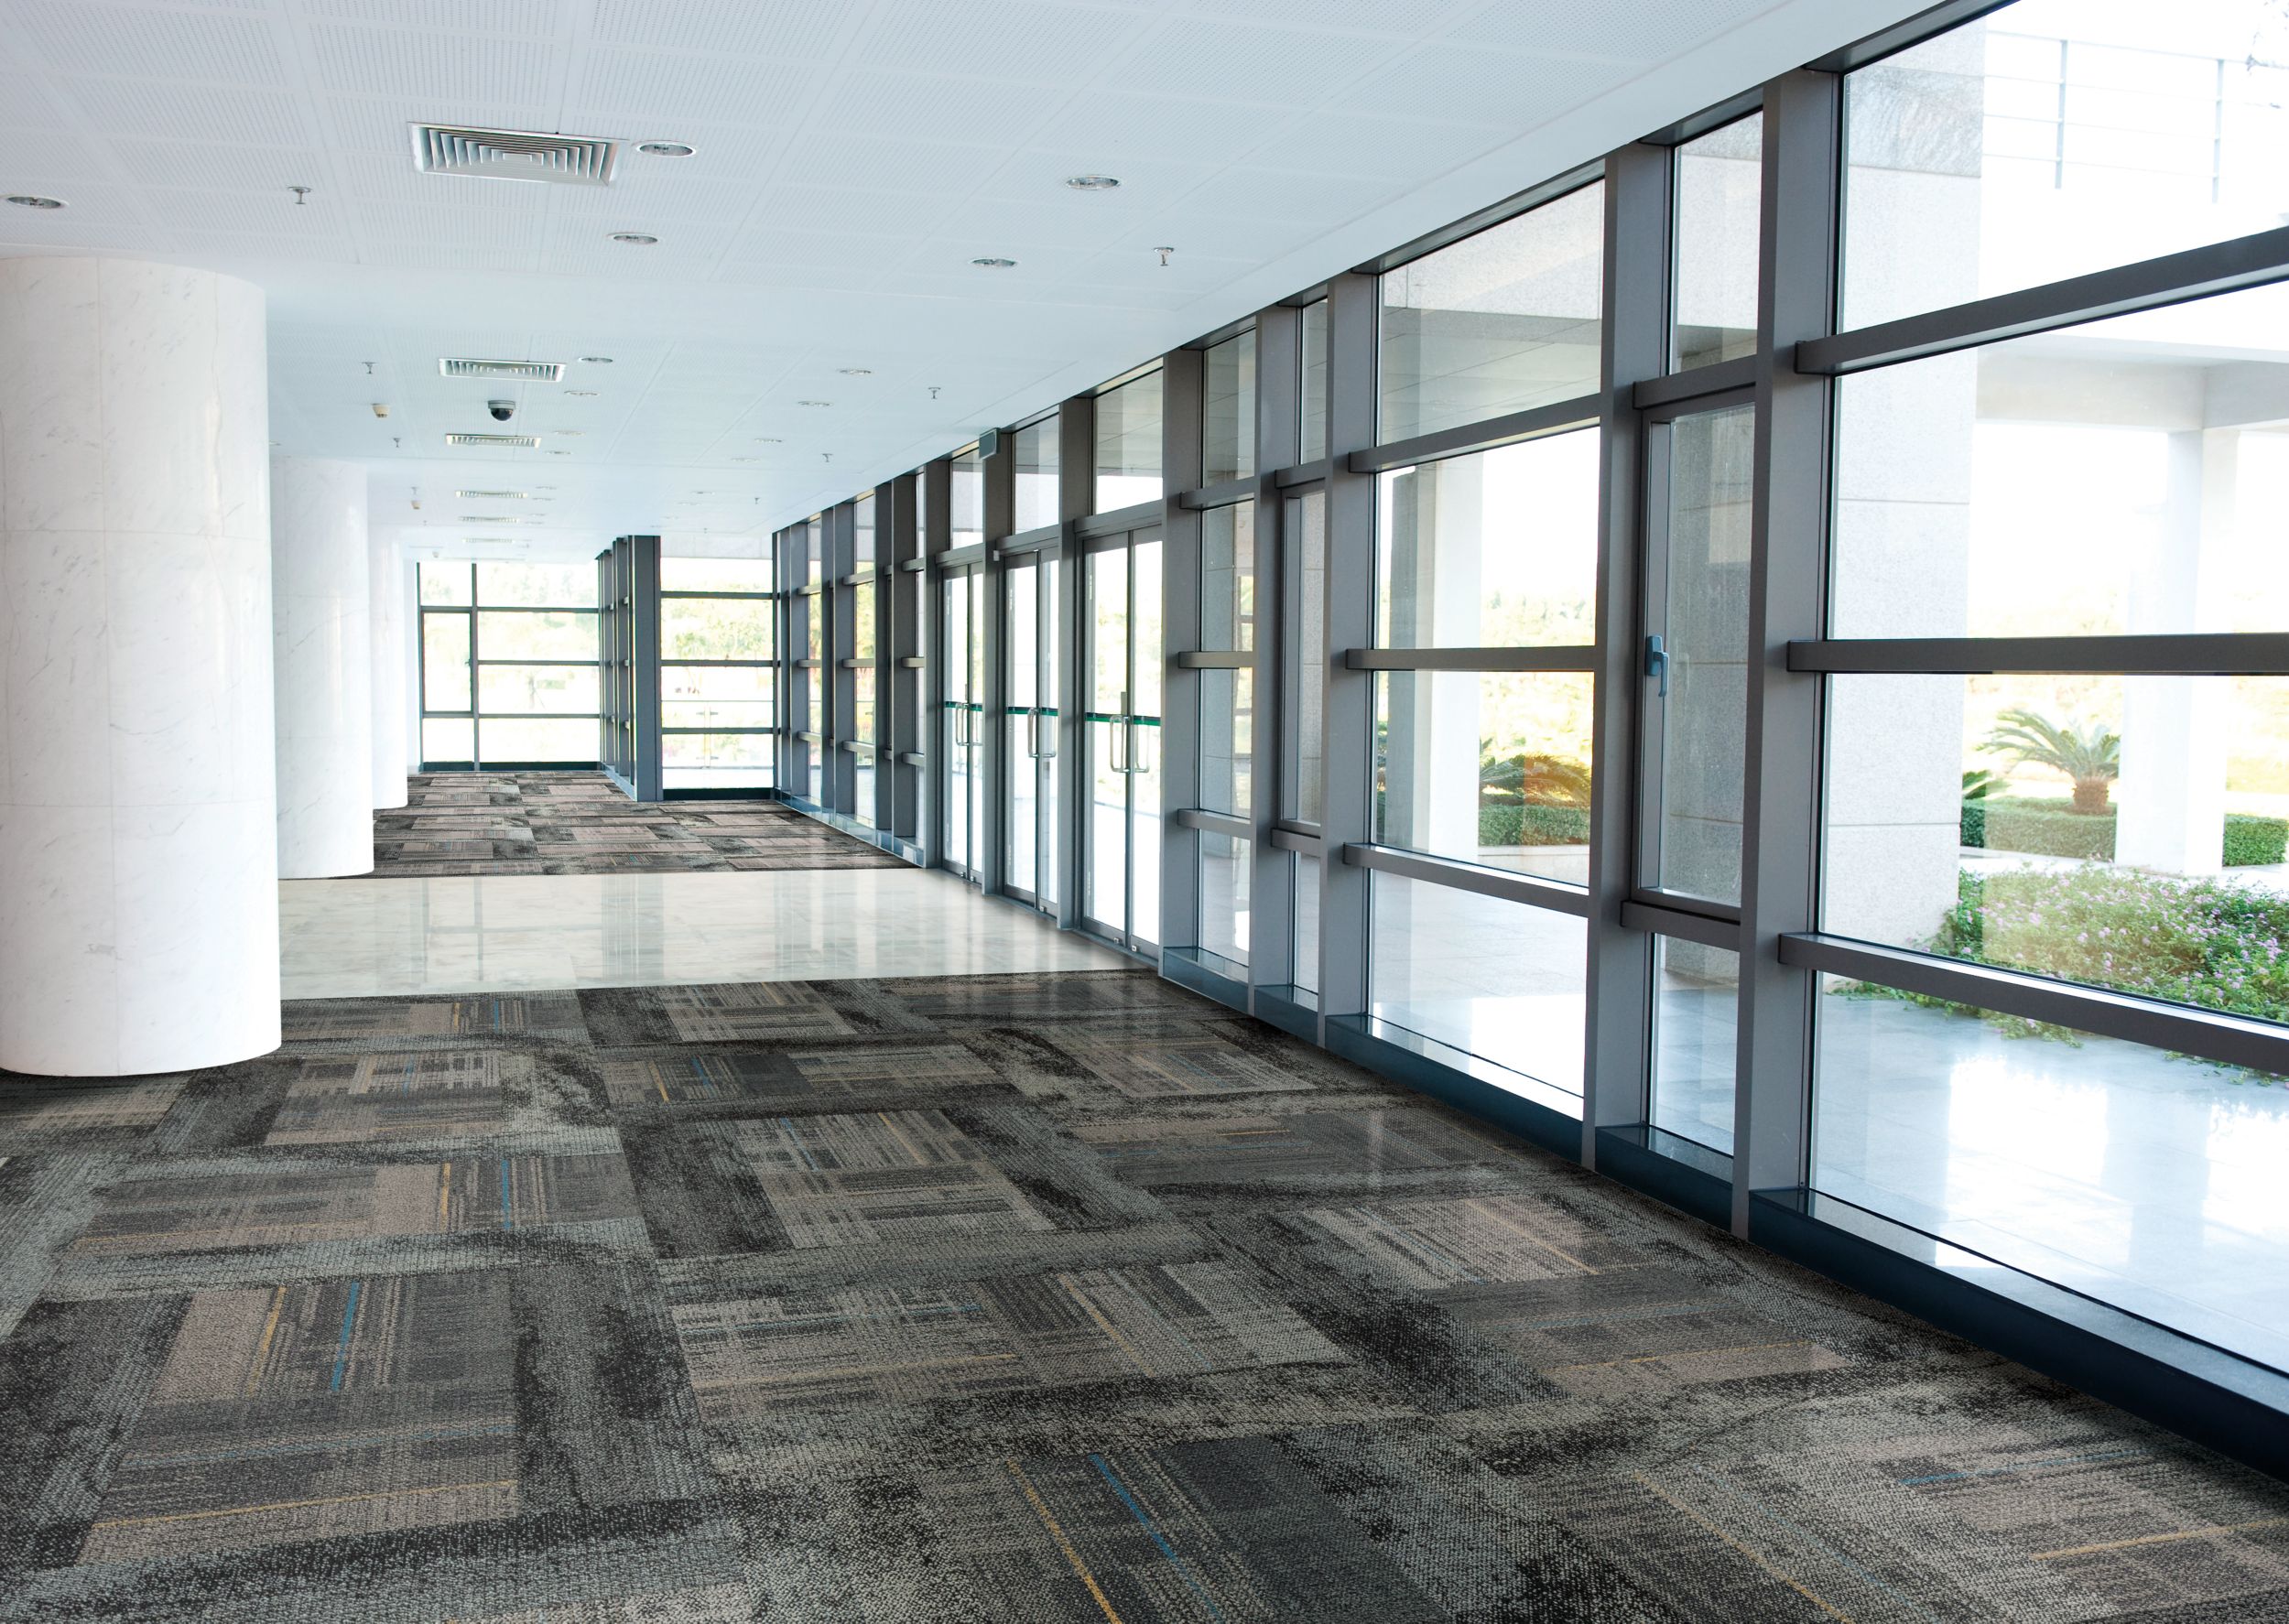 Interface AE312 carpet tile with Neighborhood Smooth plank carpet tile and Interface Textured Stones LVT in corridor with glass walls image number 11